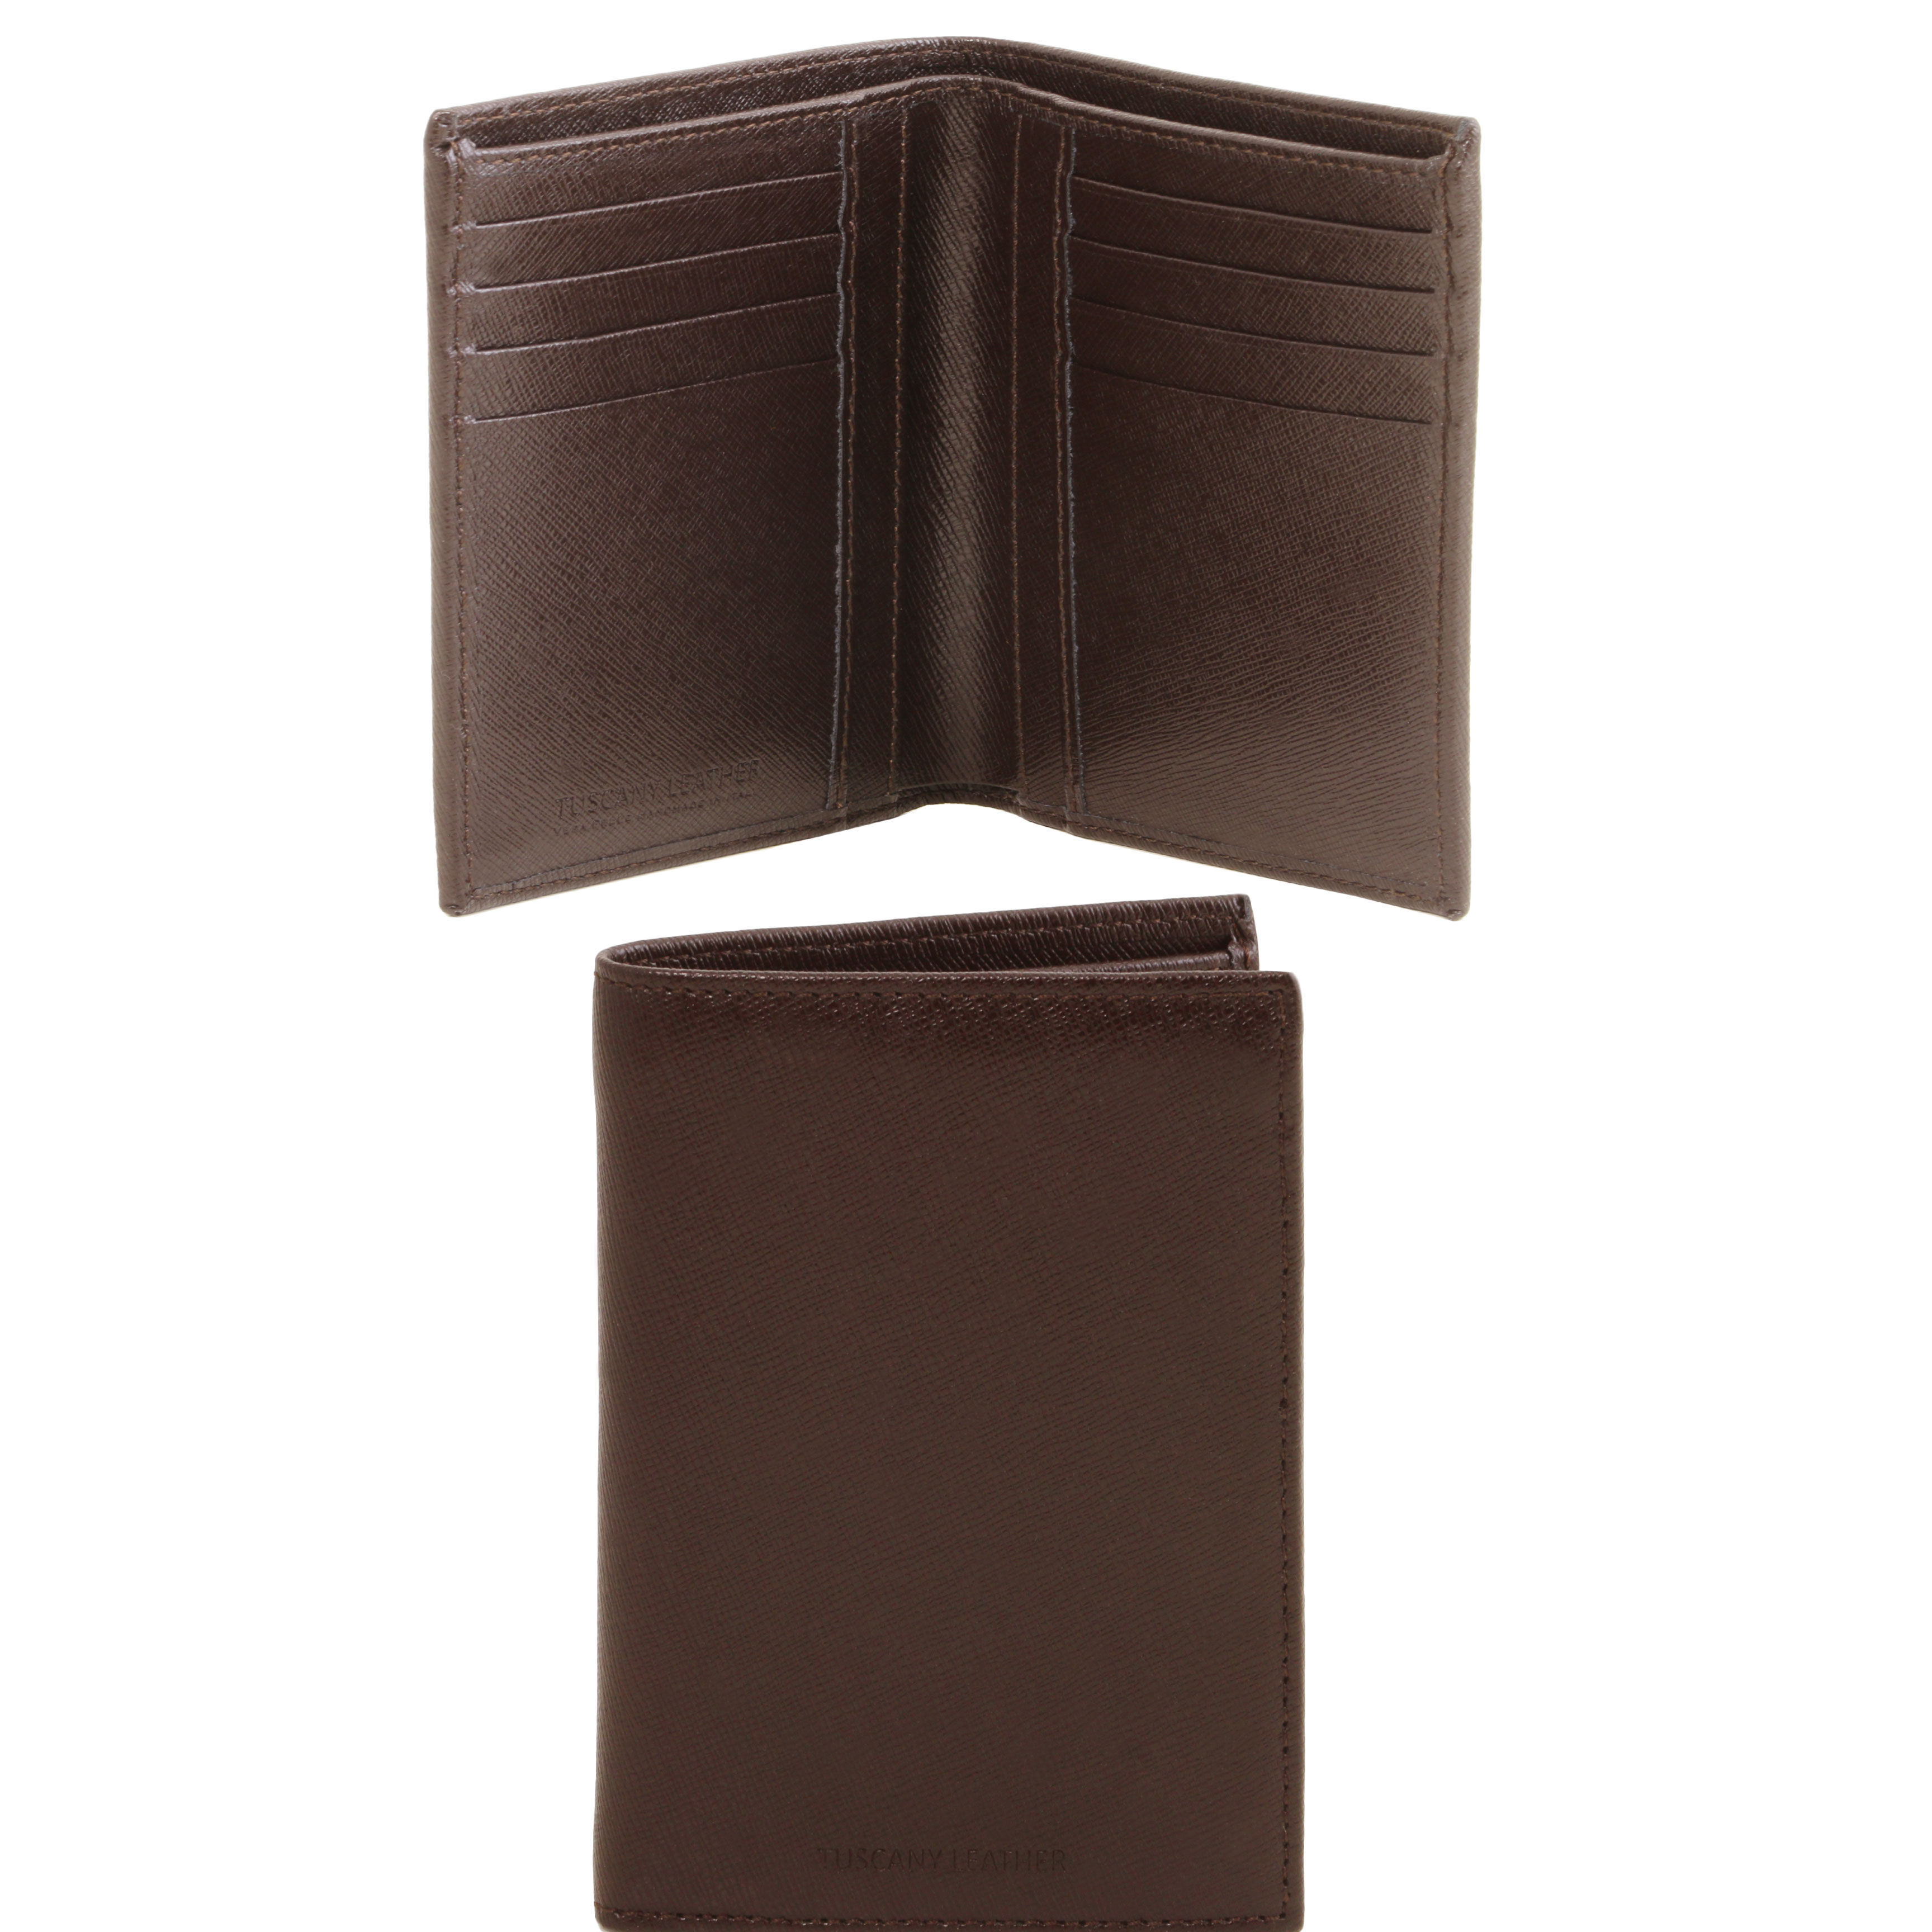 Exclusive Saffiano leather 2 fold vertical wallet for men Dark Brown